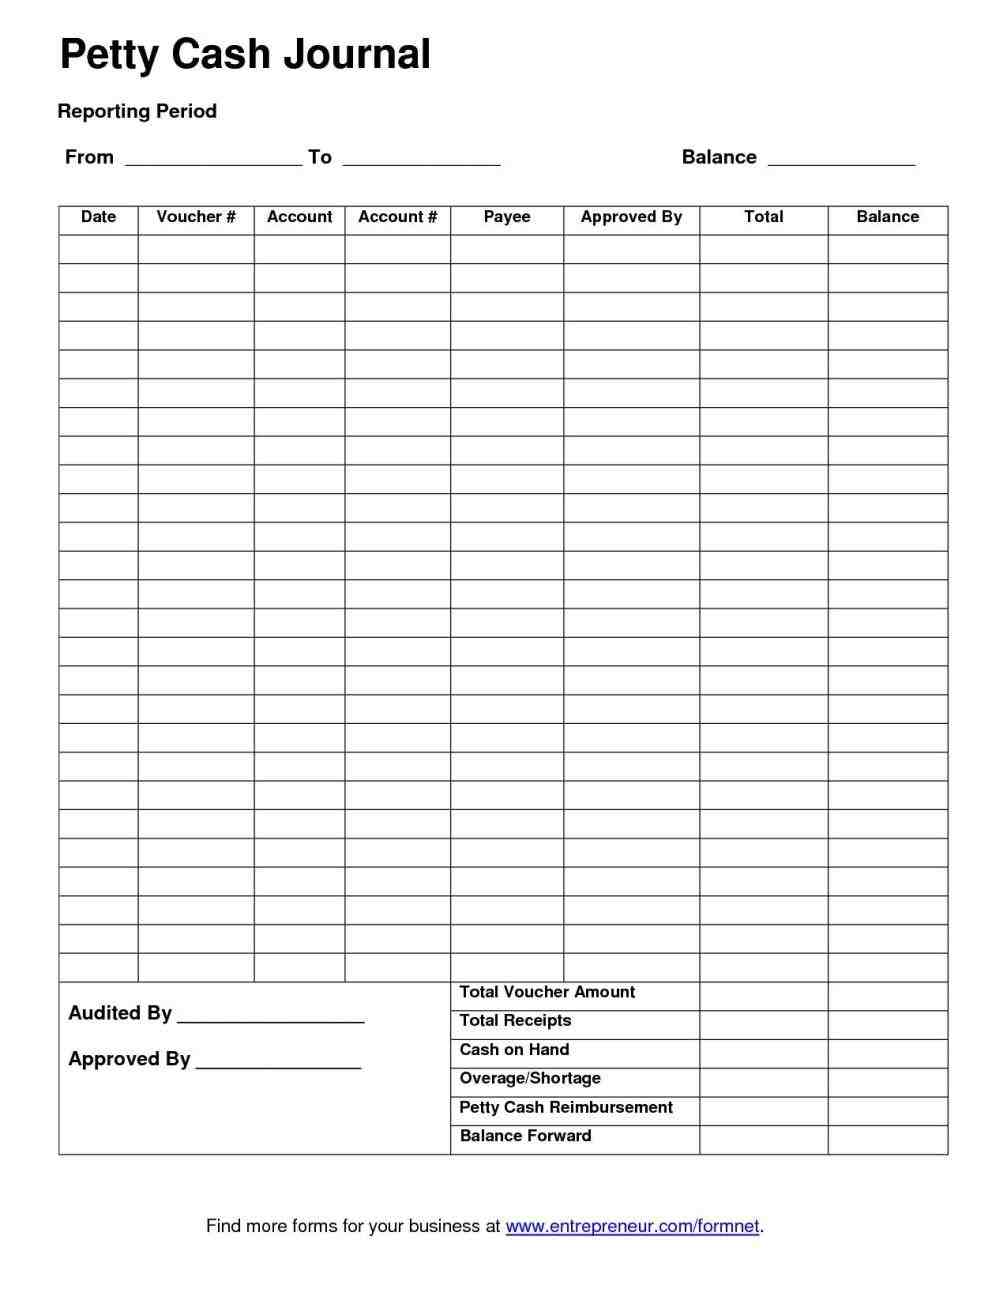 Petty Cash Reconciliation Form Excel (With images) Money template